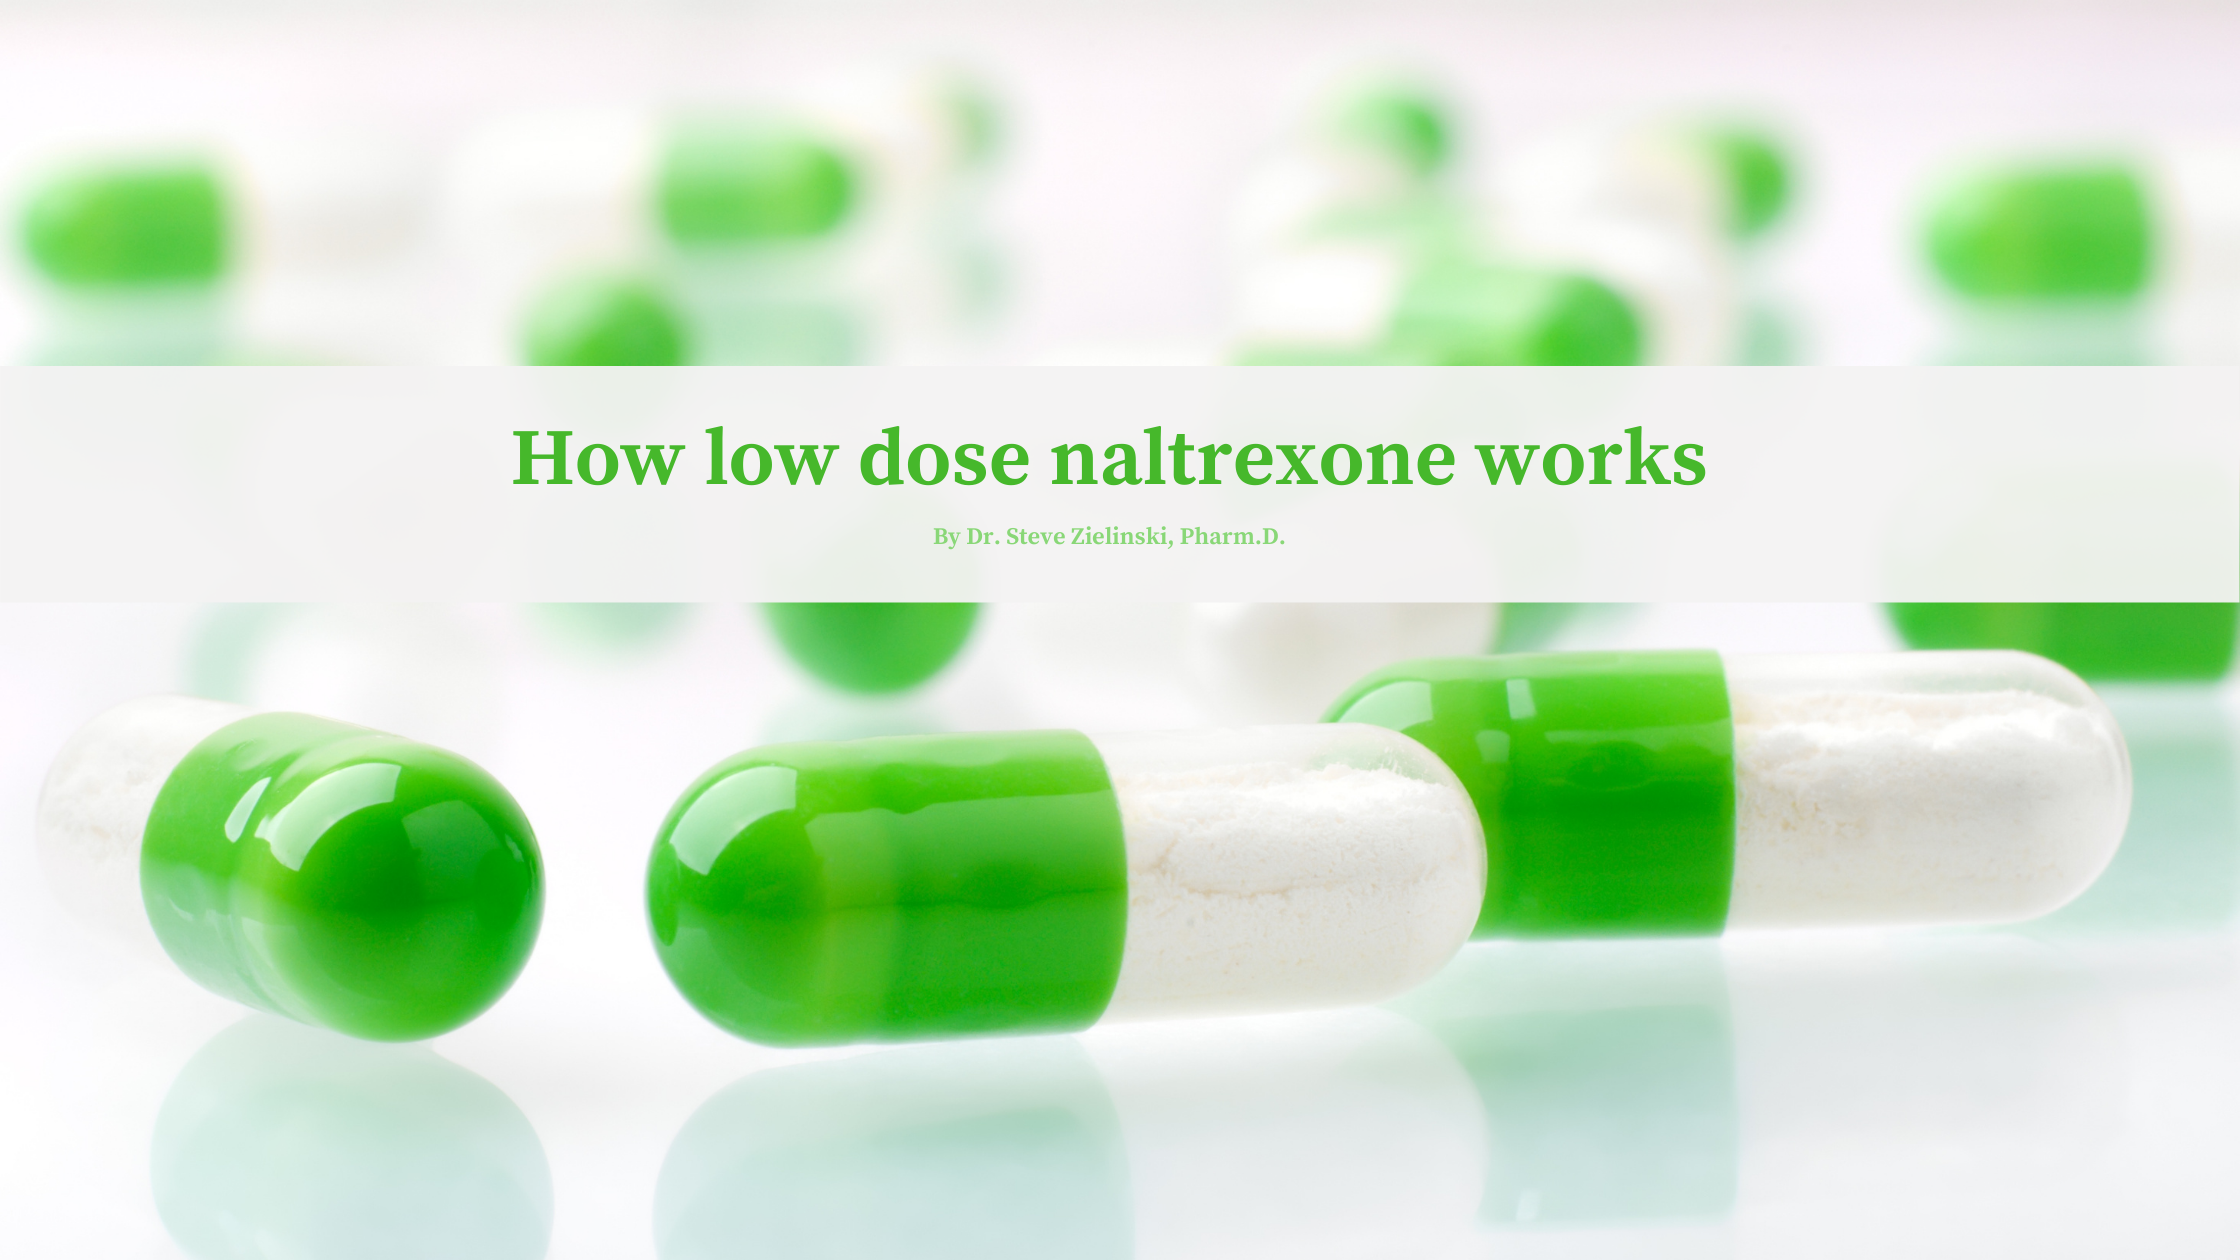 How low dose naltrexone works